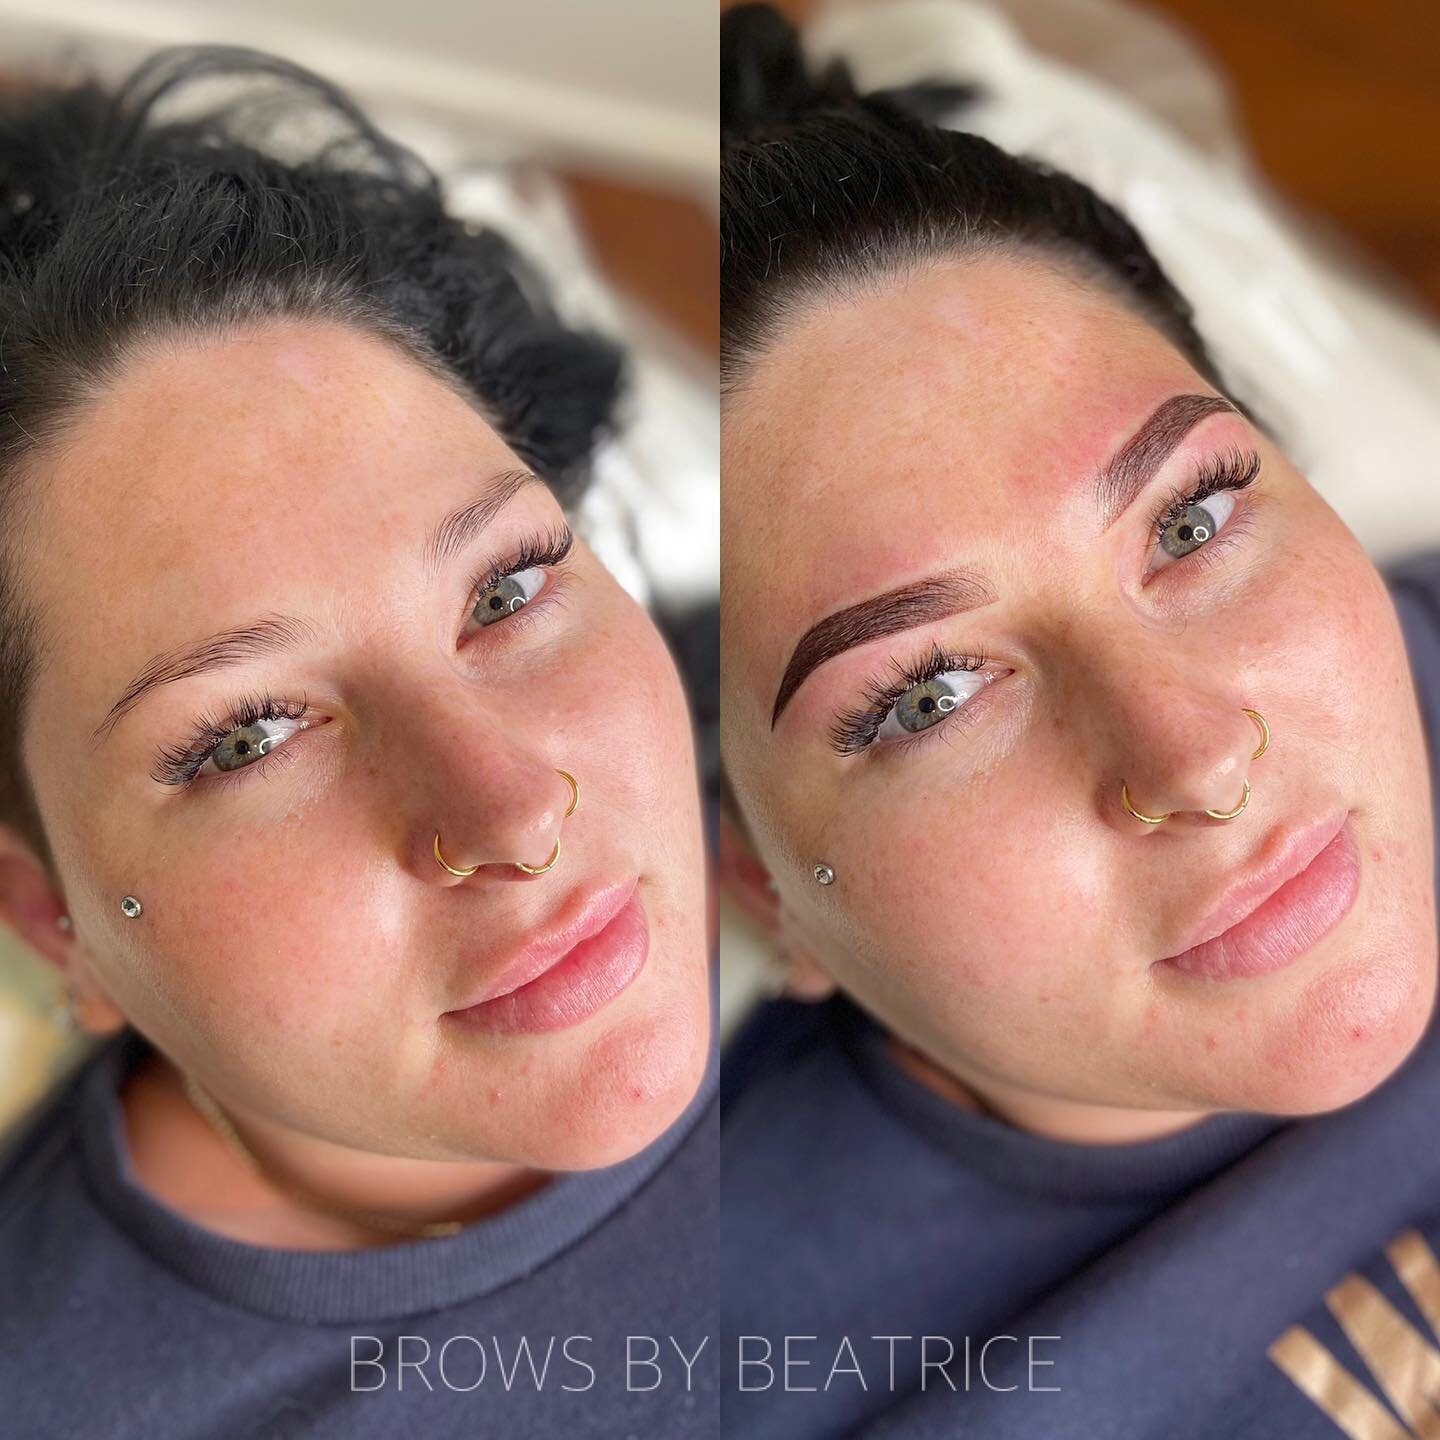 OMBR&Eacute; BROW TATTOO 🔥🔥 creating the brows of your dreams 😋

Bold, sharp, defined ombr&eacute; brow tattoo. Lasts up to 1-3 years with a touch up recommended every 12-18 months to maintain the shape + colour 💫

Using only the best &amp; most 